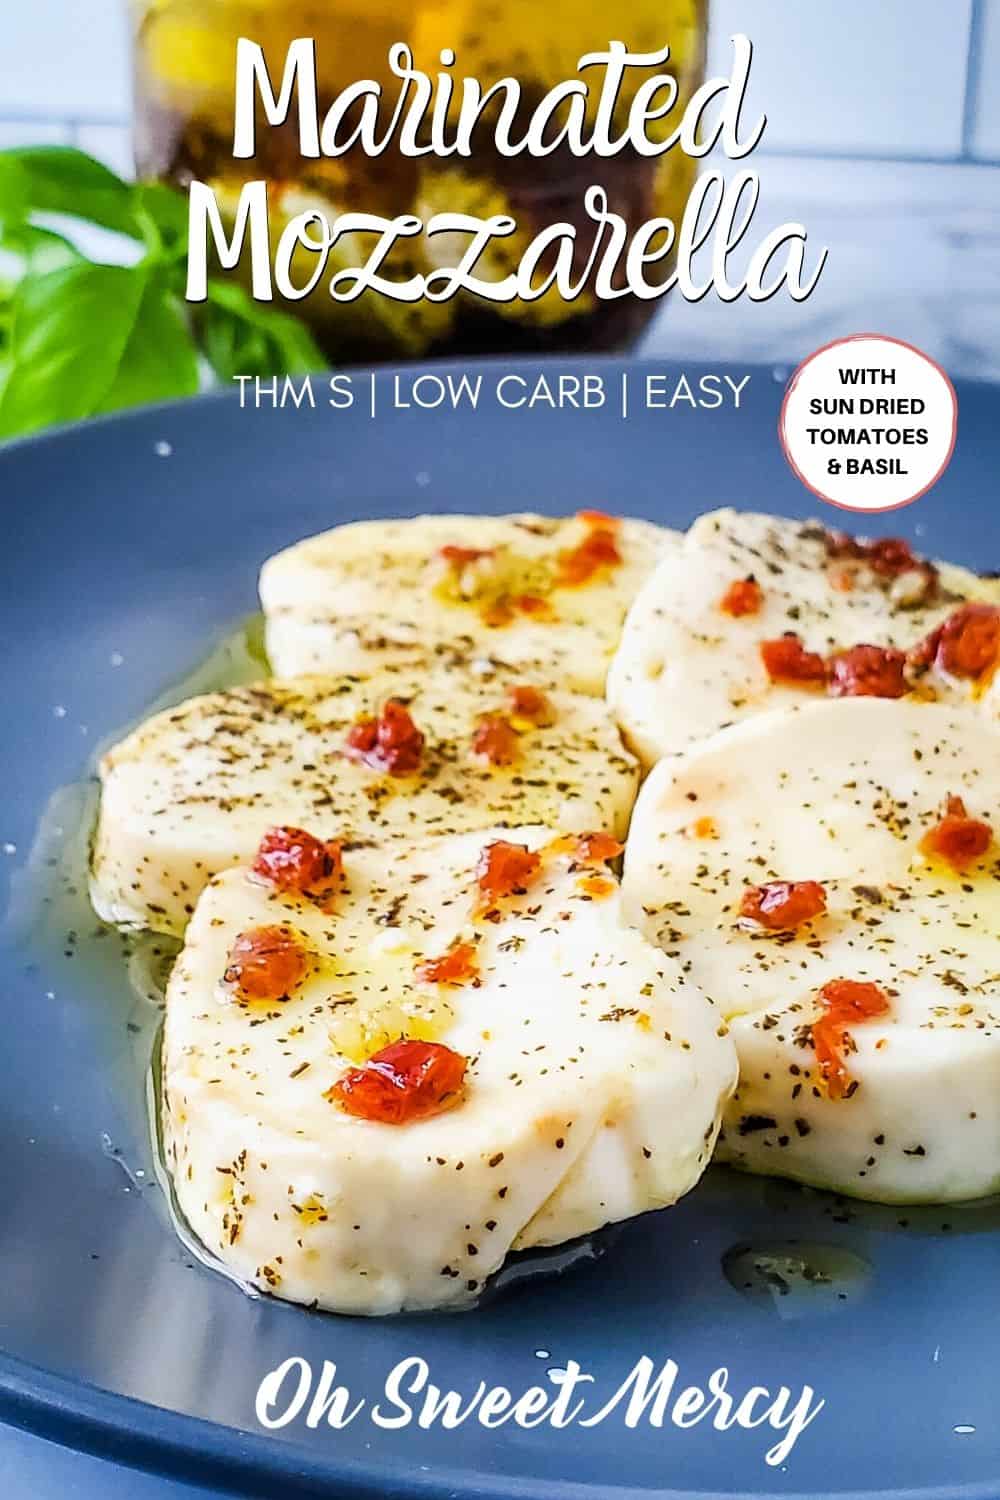 Creamy fresh mozarella marinated in olive oil infused with garlic, sun dried tomatoes, and basil makes a perfect low carb, THM S snack or appetizer. Homemade marinated mozzarella also saves you money! Easy to make and keto friendly too. #lowcarb #thm #keto #snack #appetizer #partyfood @ohsweetmercy